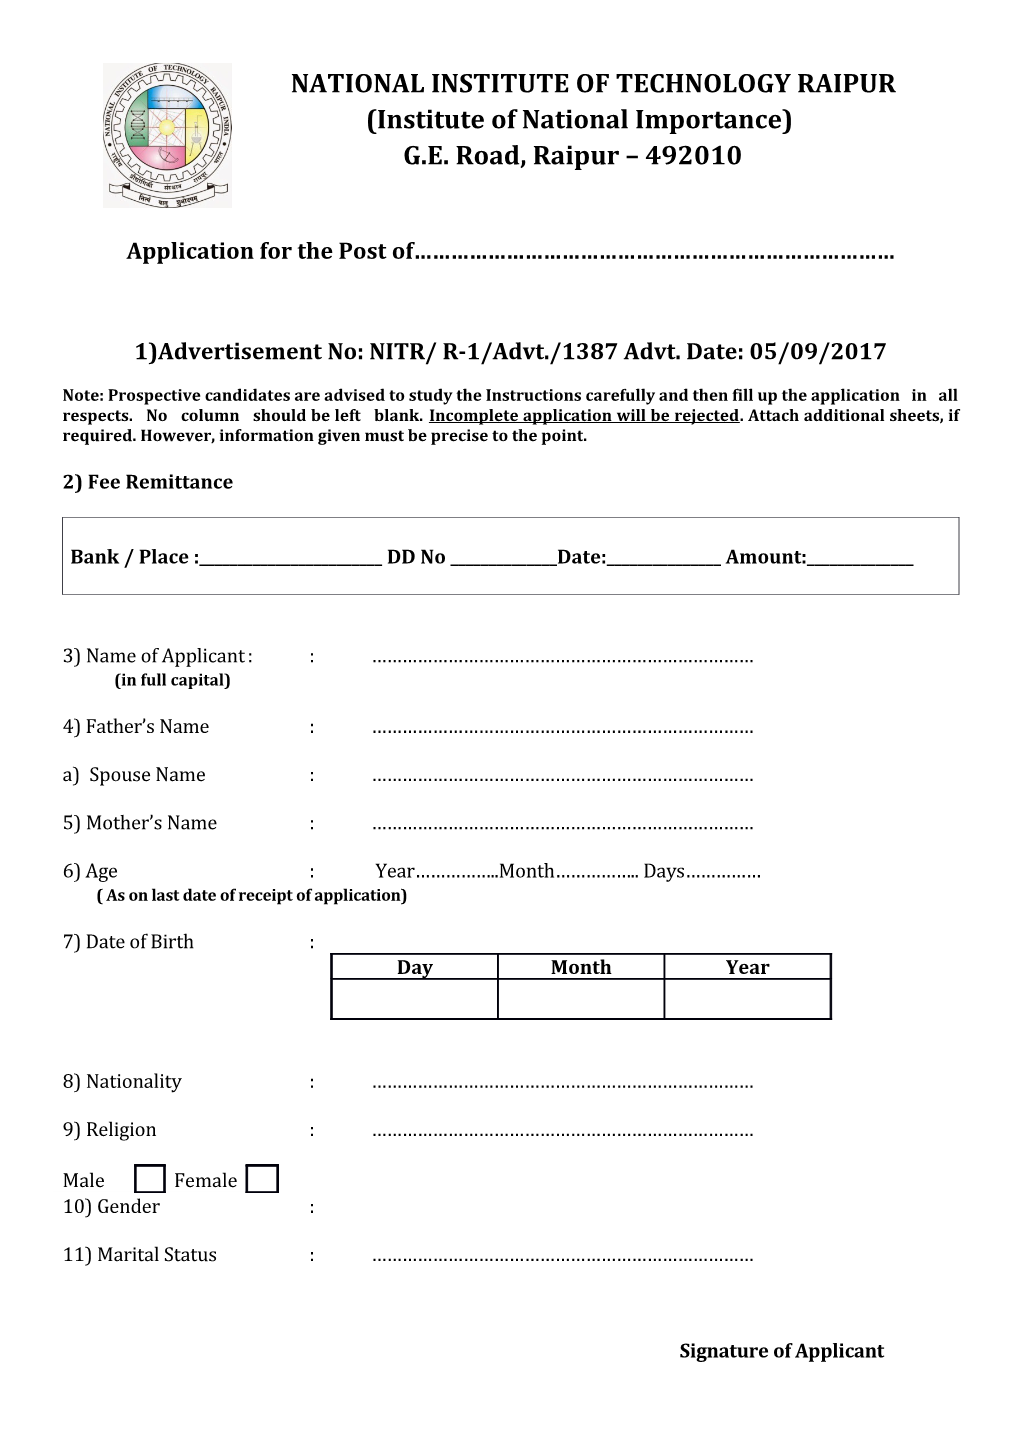 Application for the Post Of s6